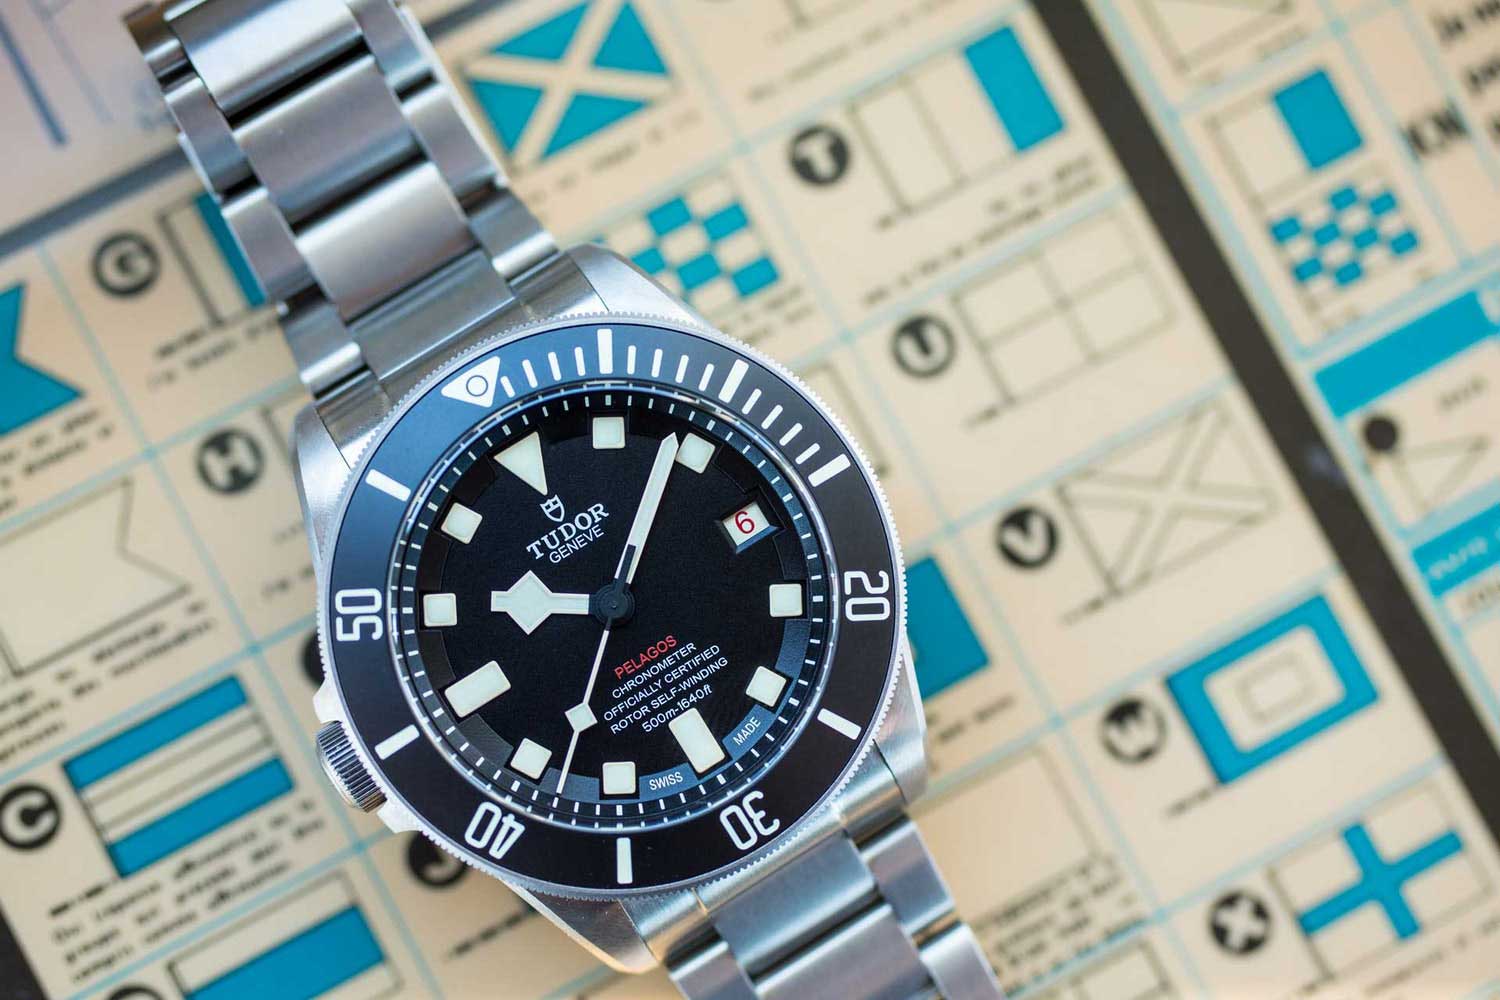 Introduced in 2012, the Tudor Pelagos was the single most provocative timepiece of the year because it one-up-ed every dive watch on the market